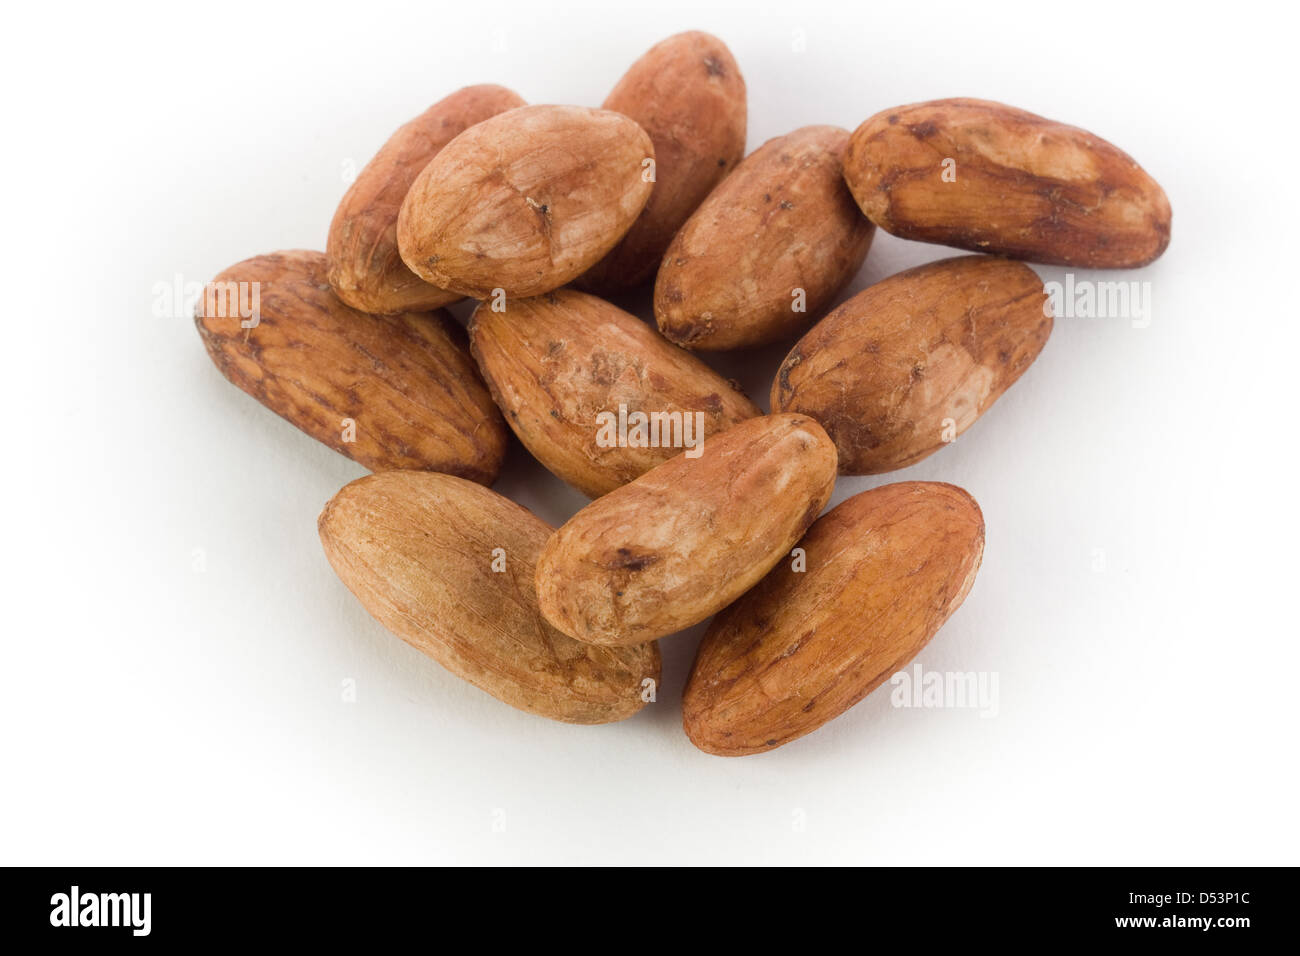 Cocoa beans on white background Stock Photo